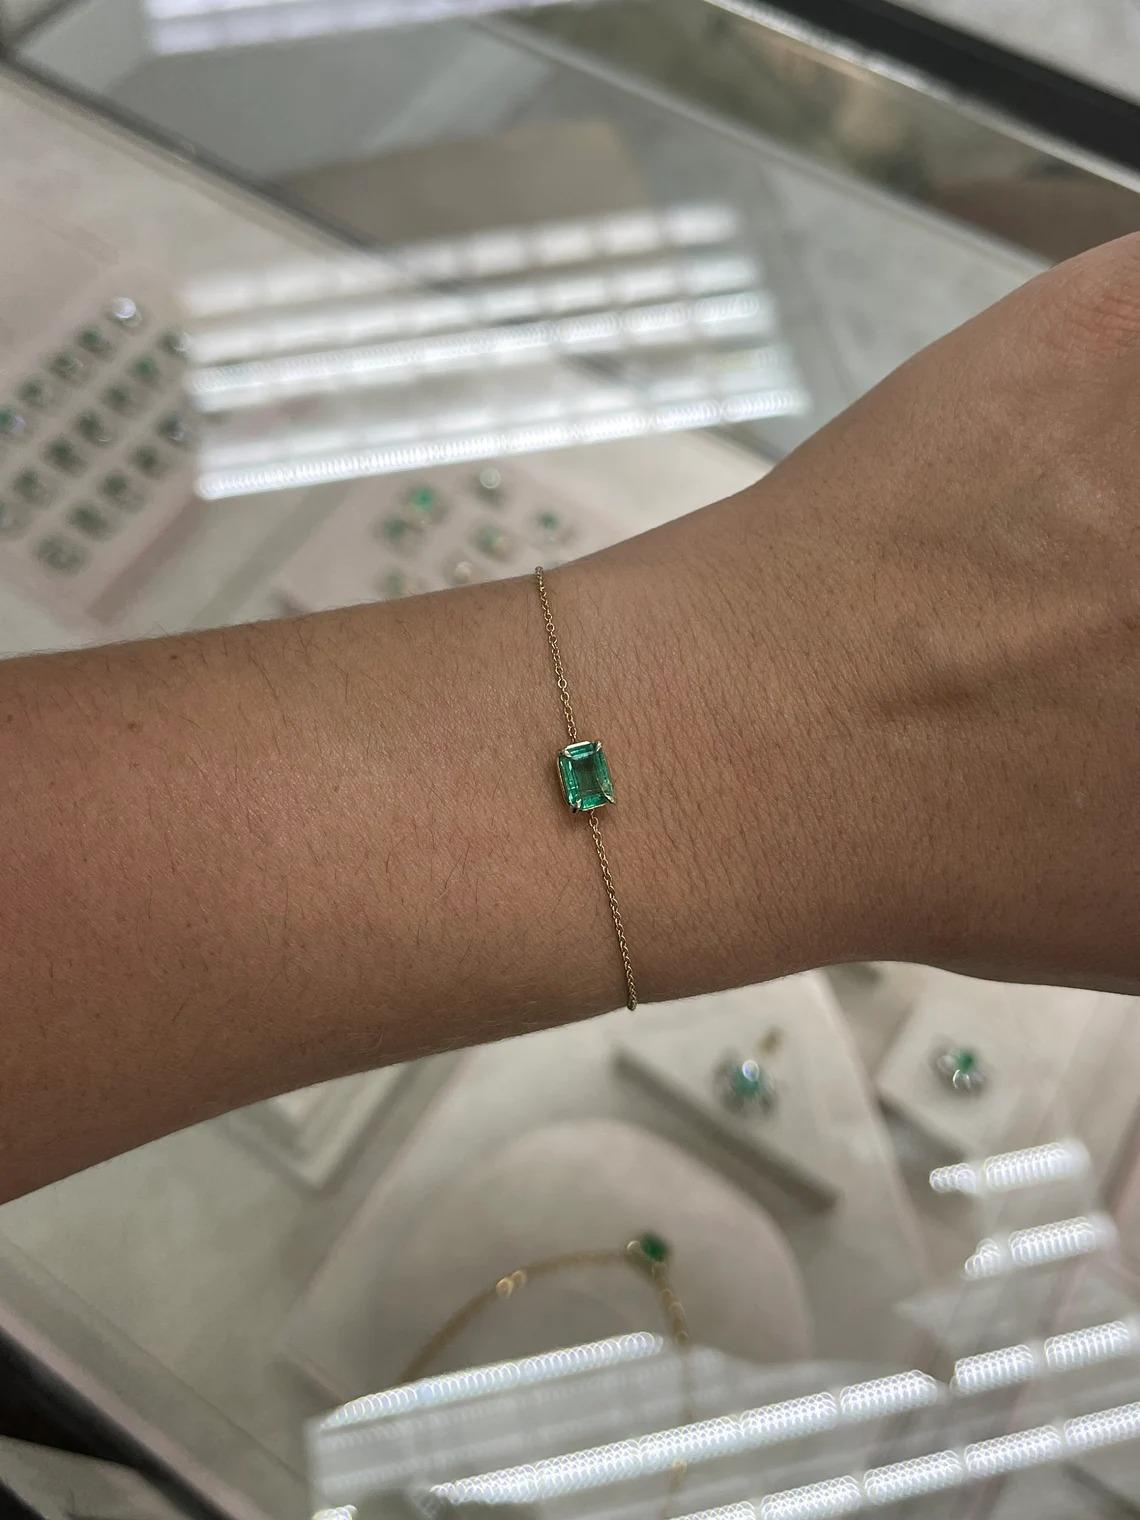 A gorgeous solitaire emerald bracelet. This piece features a remarkable emerald-cut emerald weighing a full carat of pure emerald green bliss. The gemstone showcases a ravishing medium green color with very good clarity and luster. Set in a secure